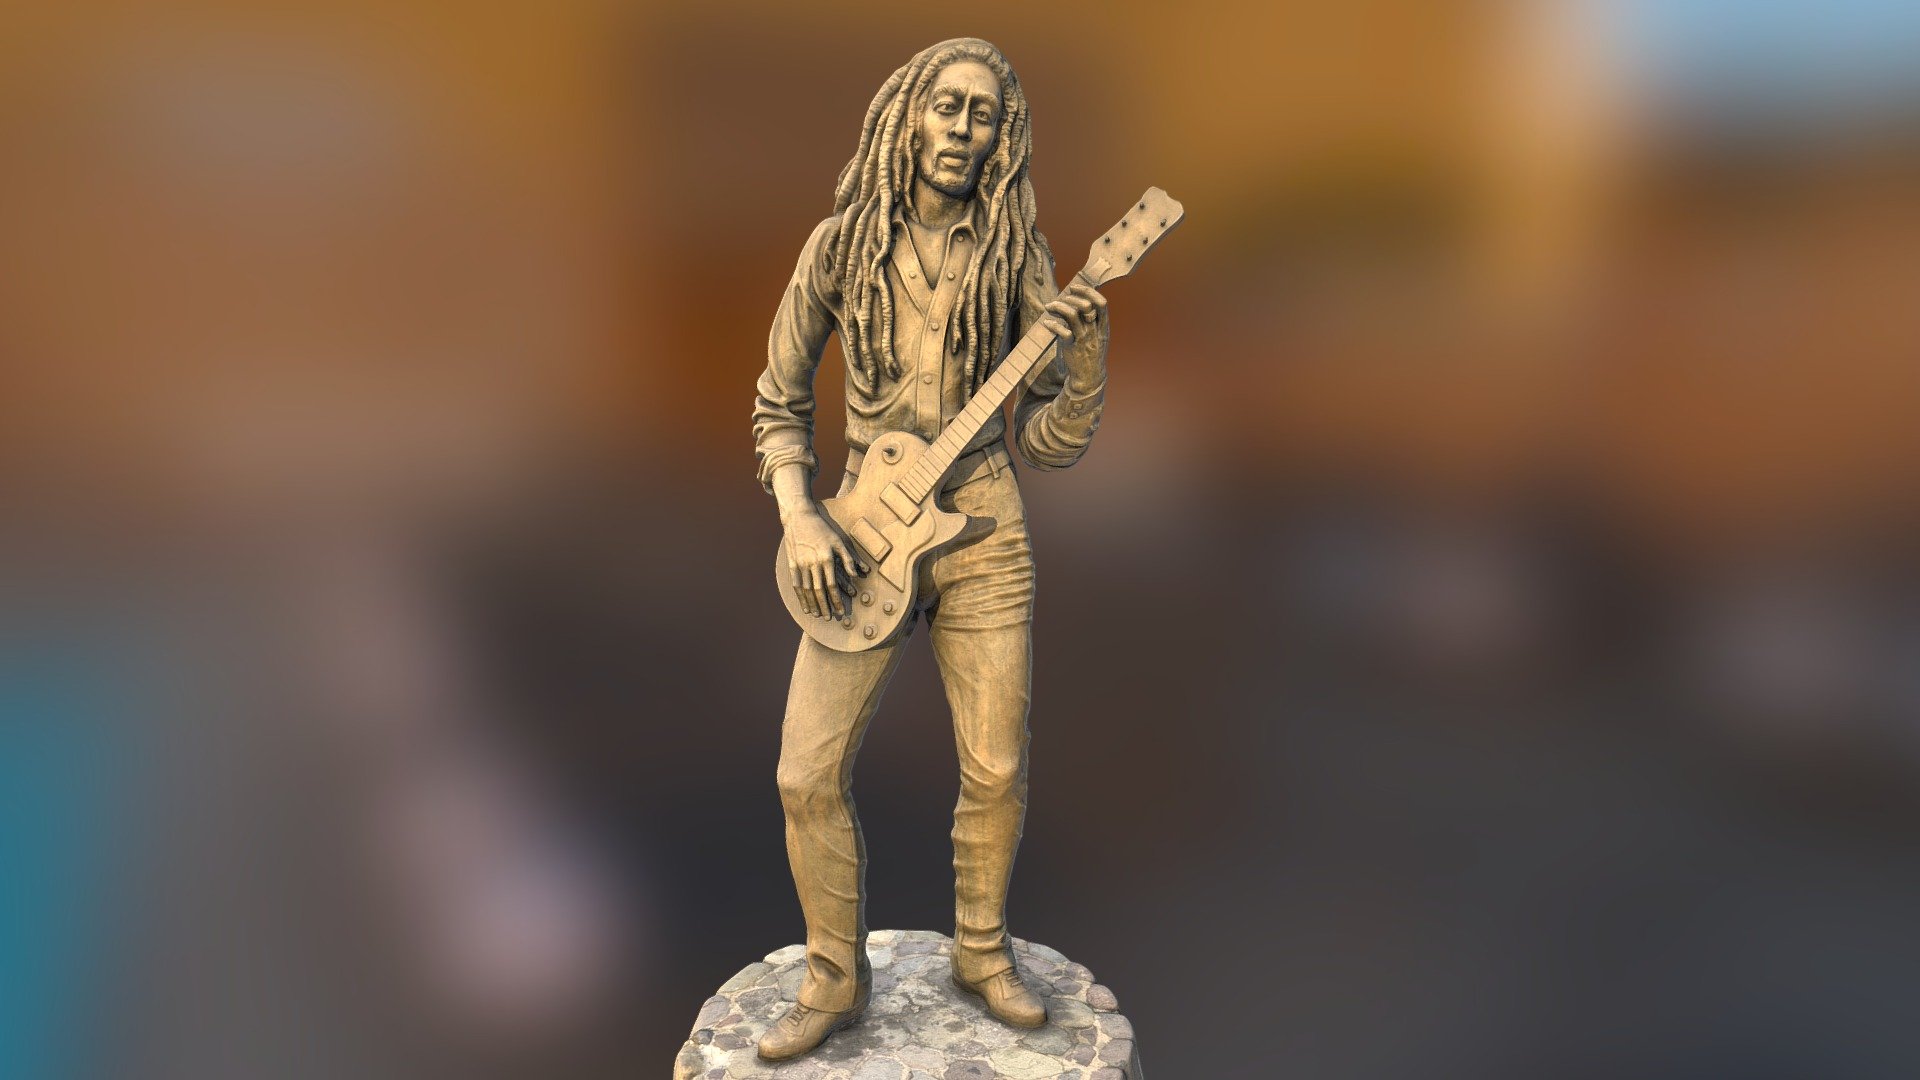 Bob Marley Statue at Independence Park in Kingston at Arthur Wint Drive and Herb Mckenly drive. Bob Marley statue is accessible to the public free of charge. However, it is not frequent by tourists because of its location 3d model